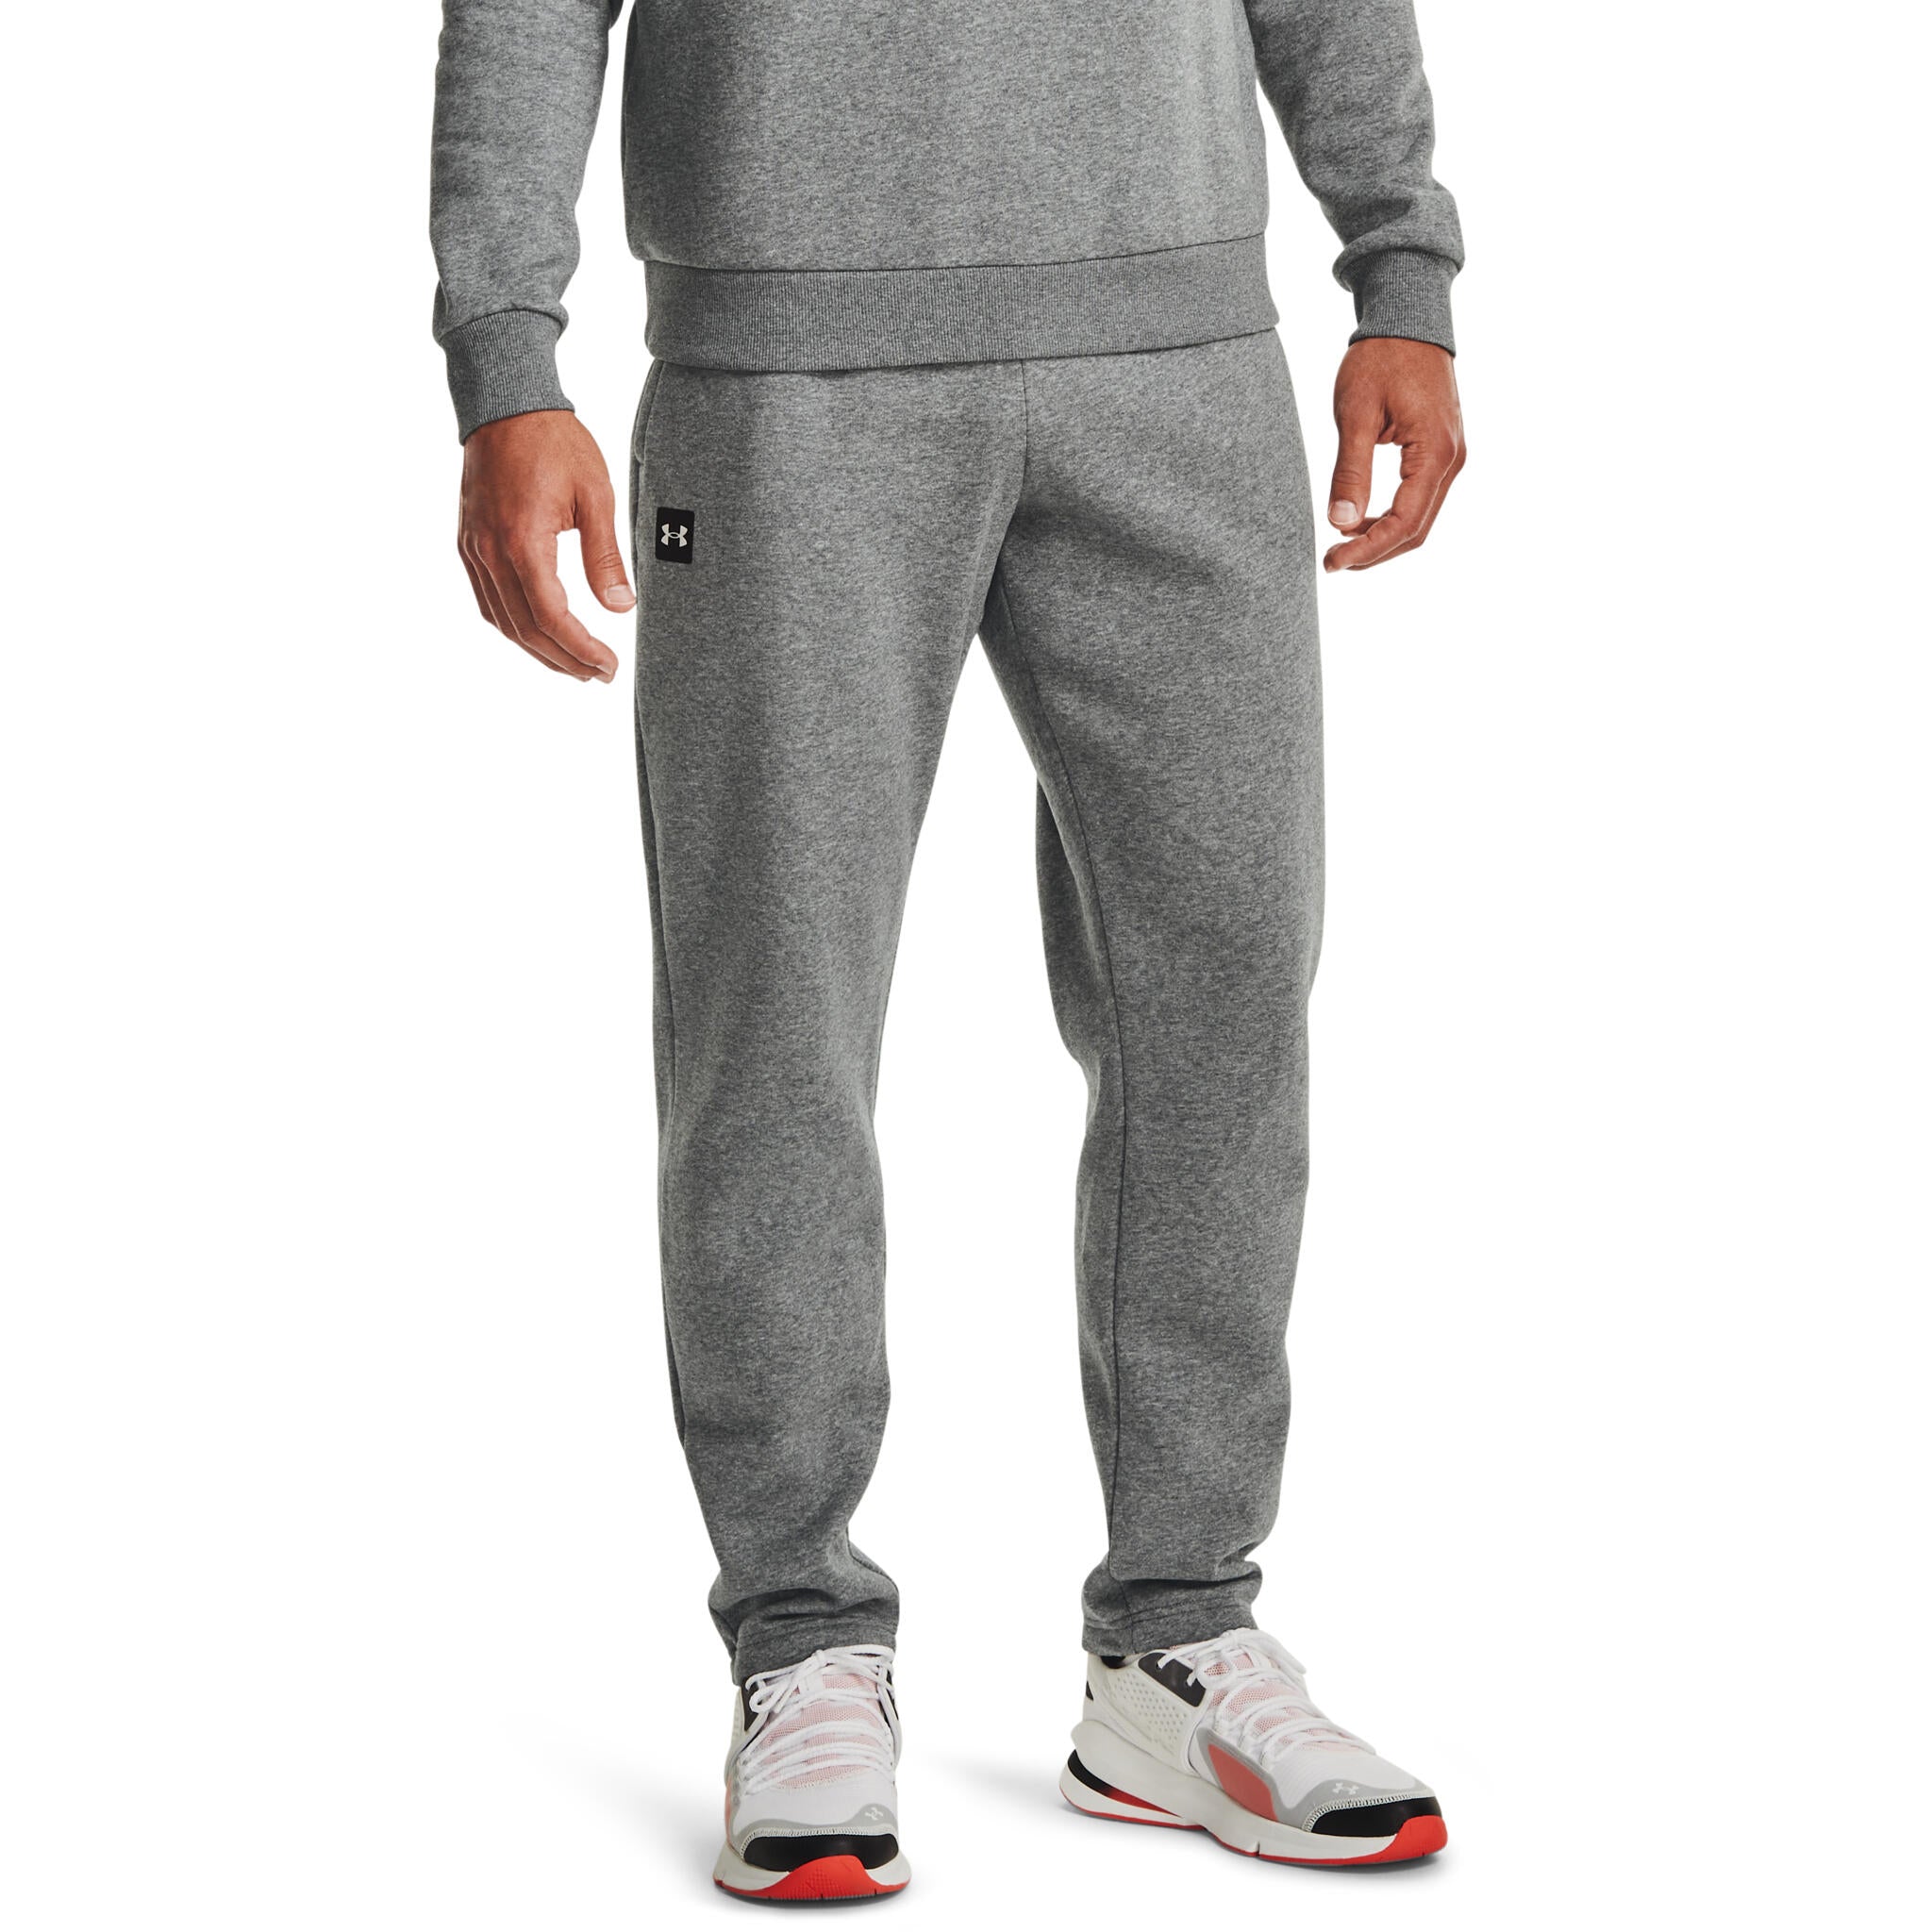 Under Armour Men's Rival Fleece Pants - 1379868-012. Pitch Gray Mens Large  New